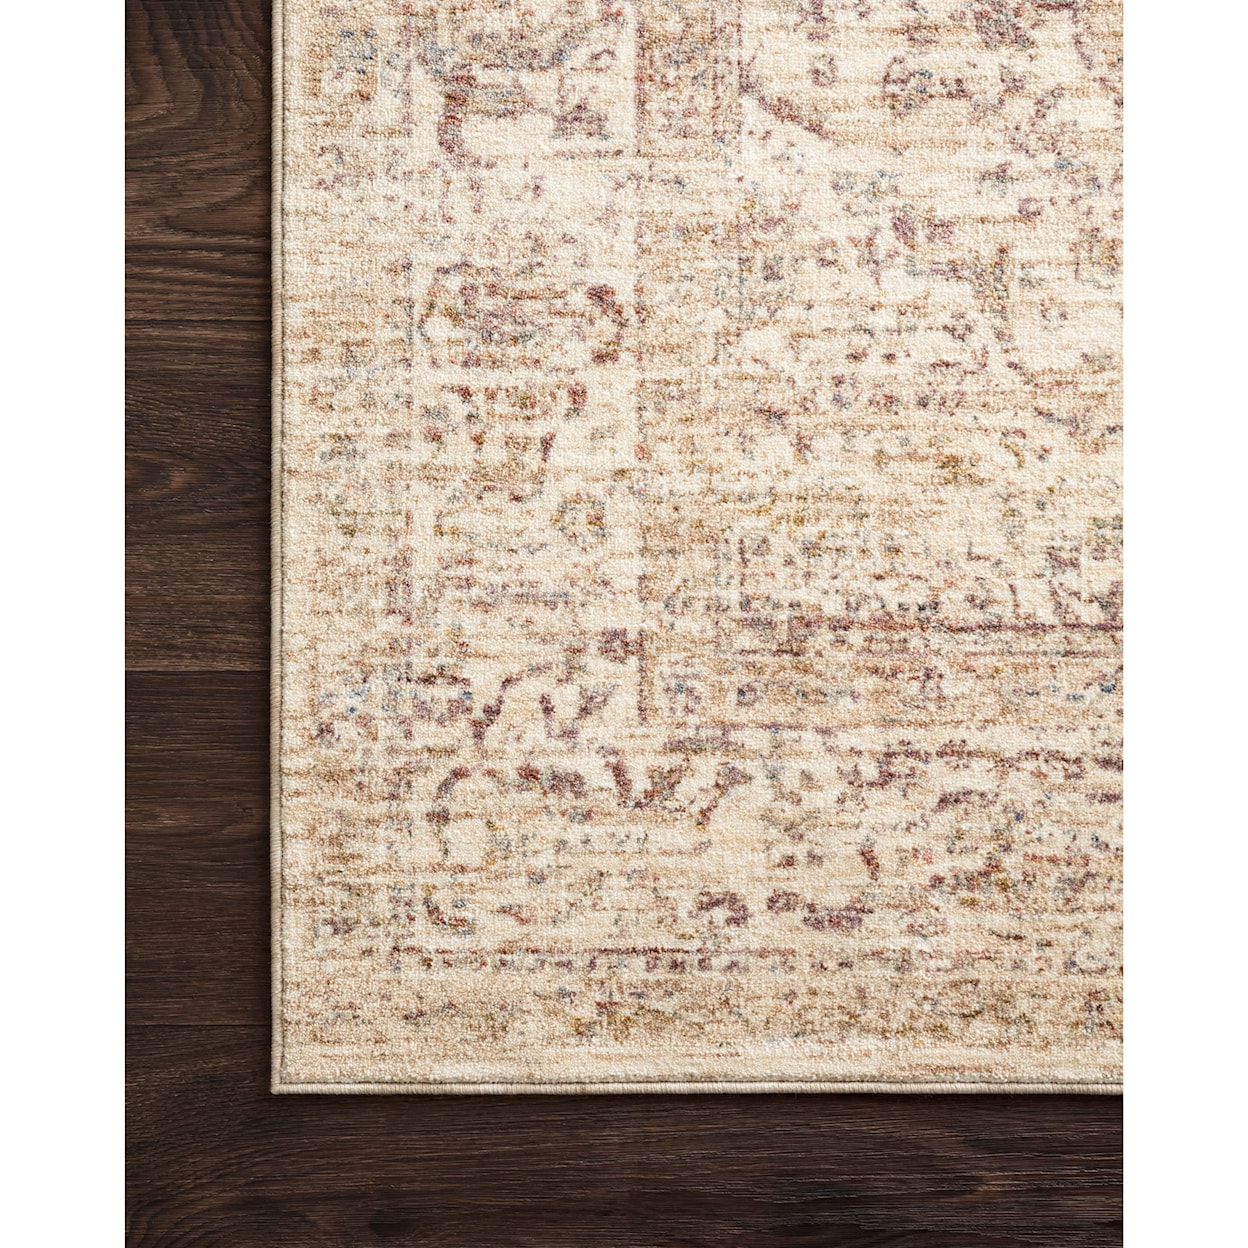 Reeds Rugs Revere 7'10" x 10' Ivory / Berry Rug